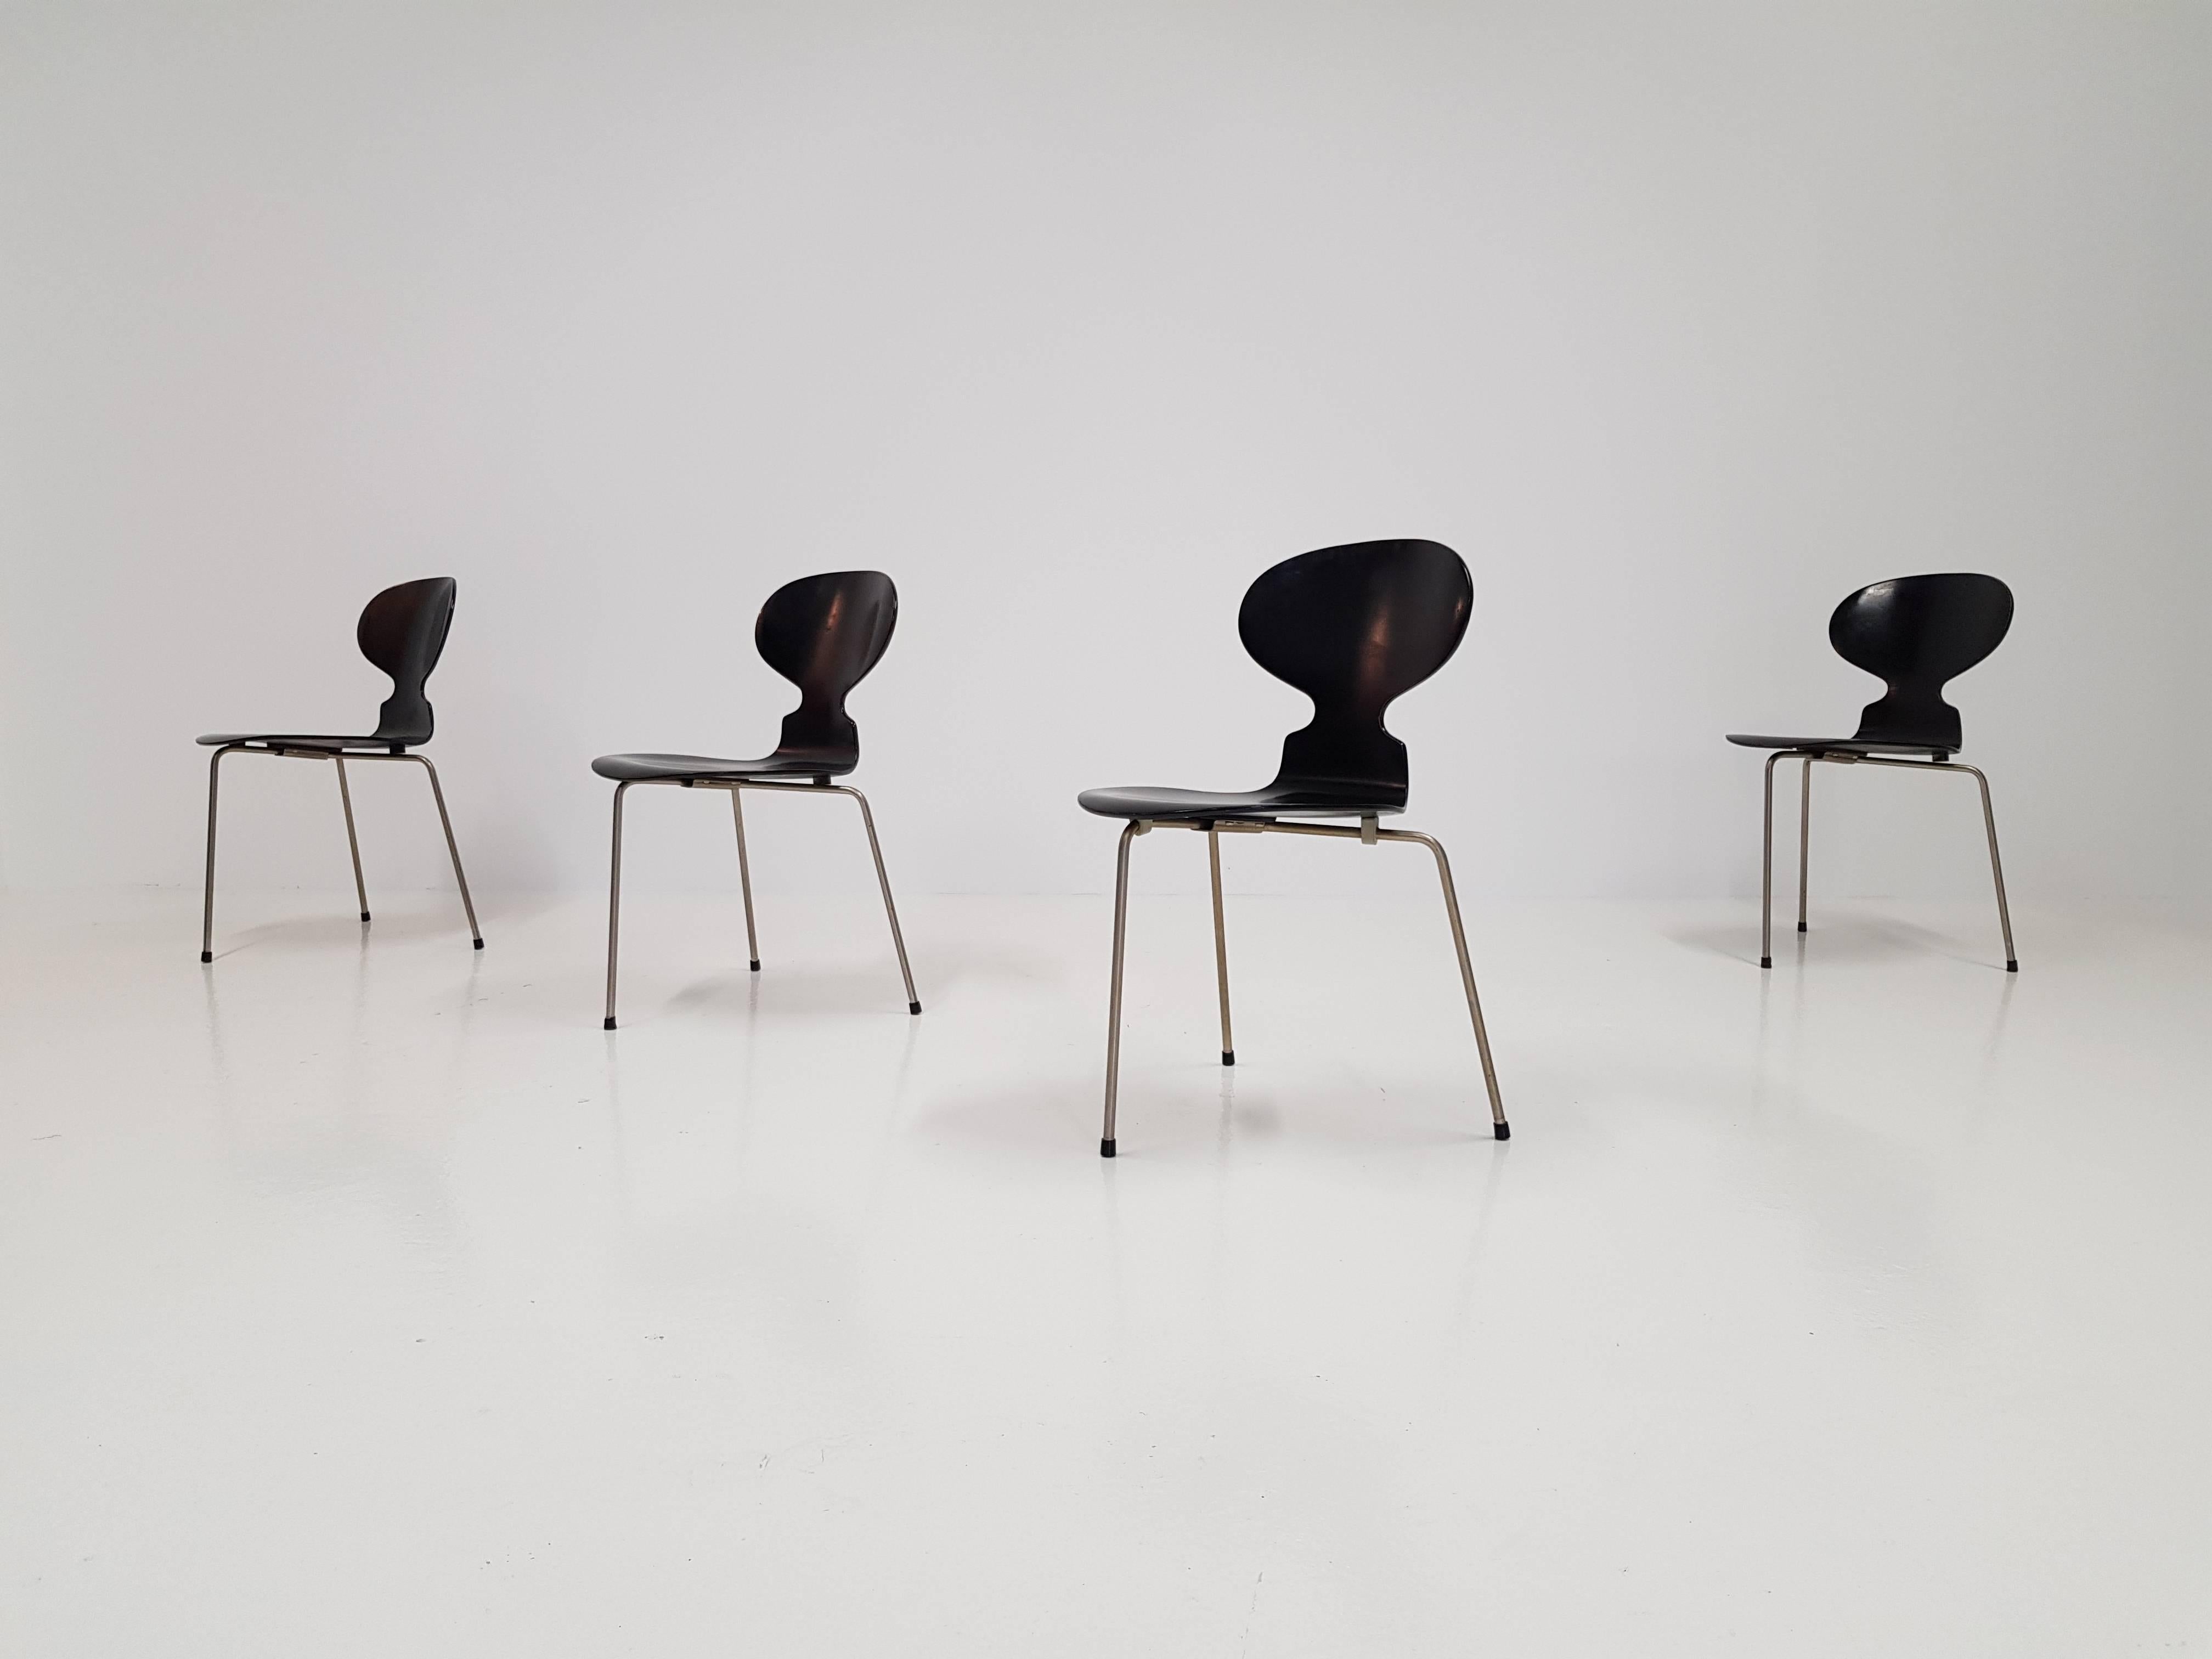 Lacquered Early Model 3100 'Ant' Chairs by Arne Jacobsen for Fritz Hansen Designed in 1952